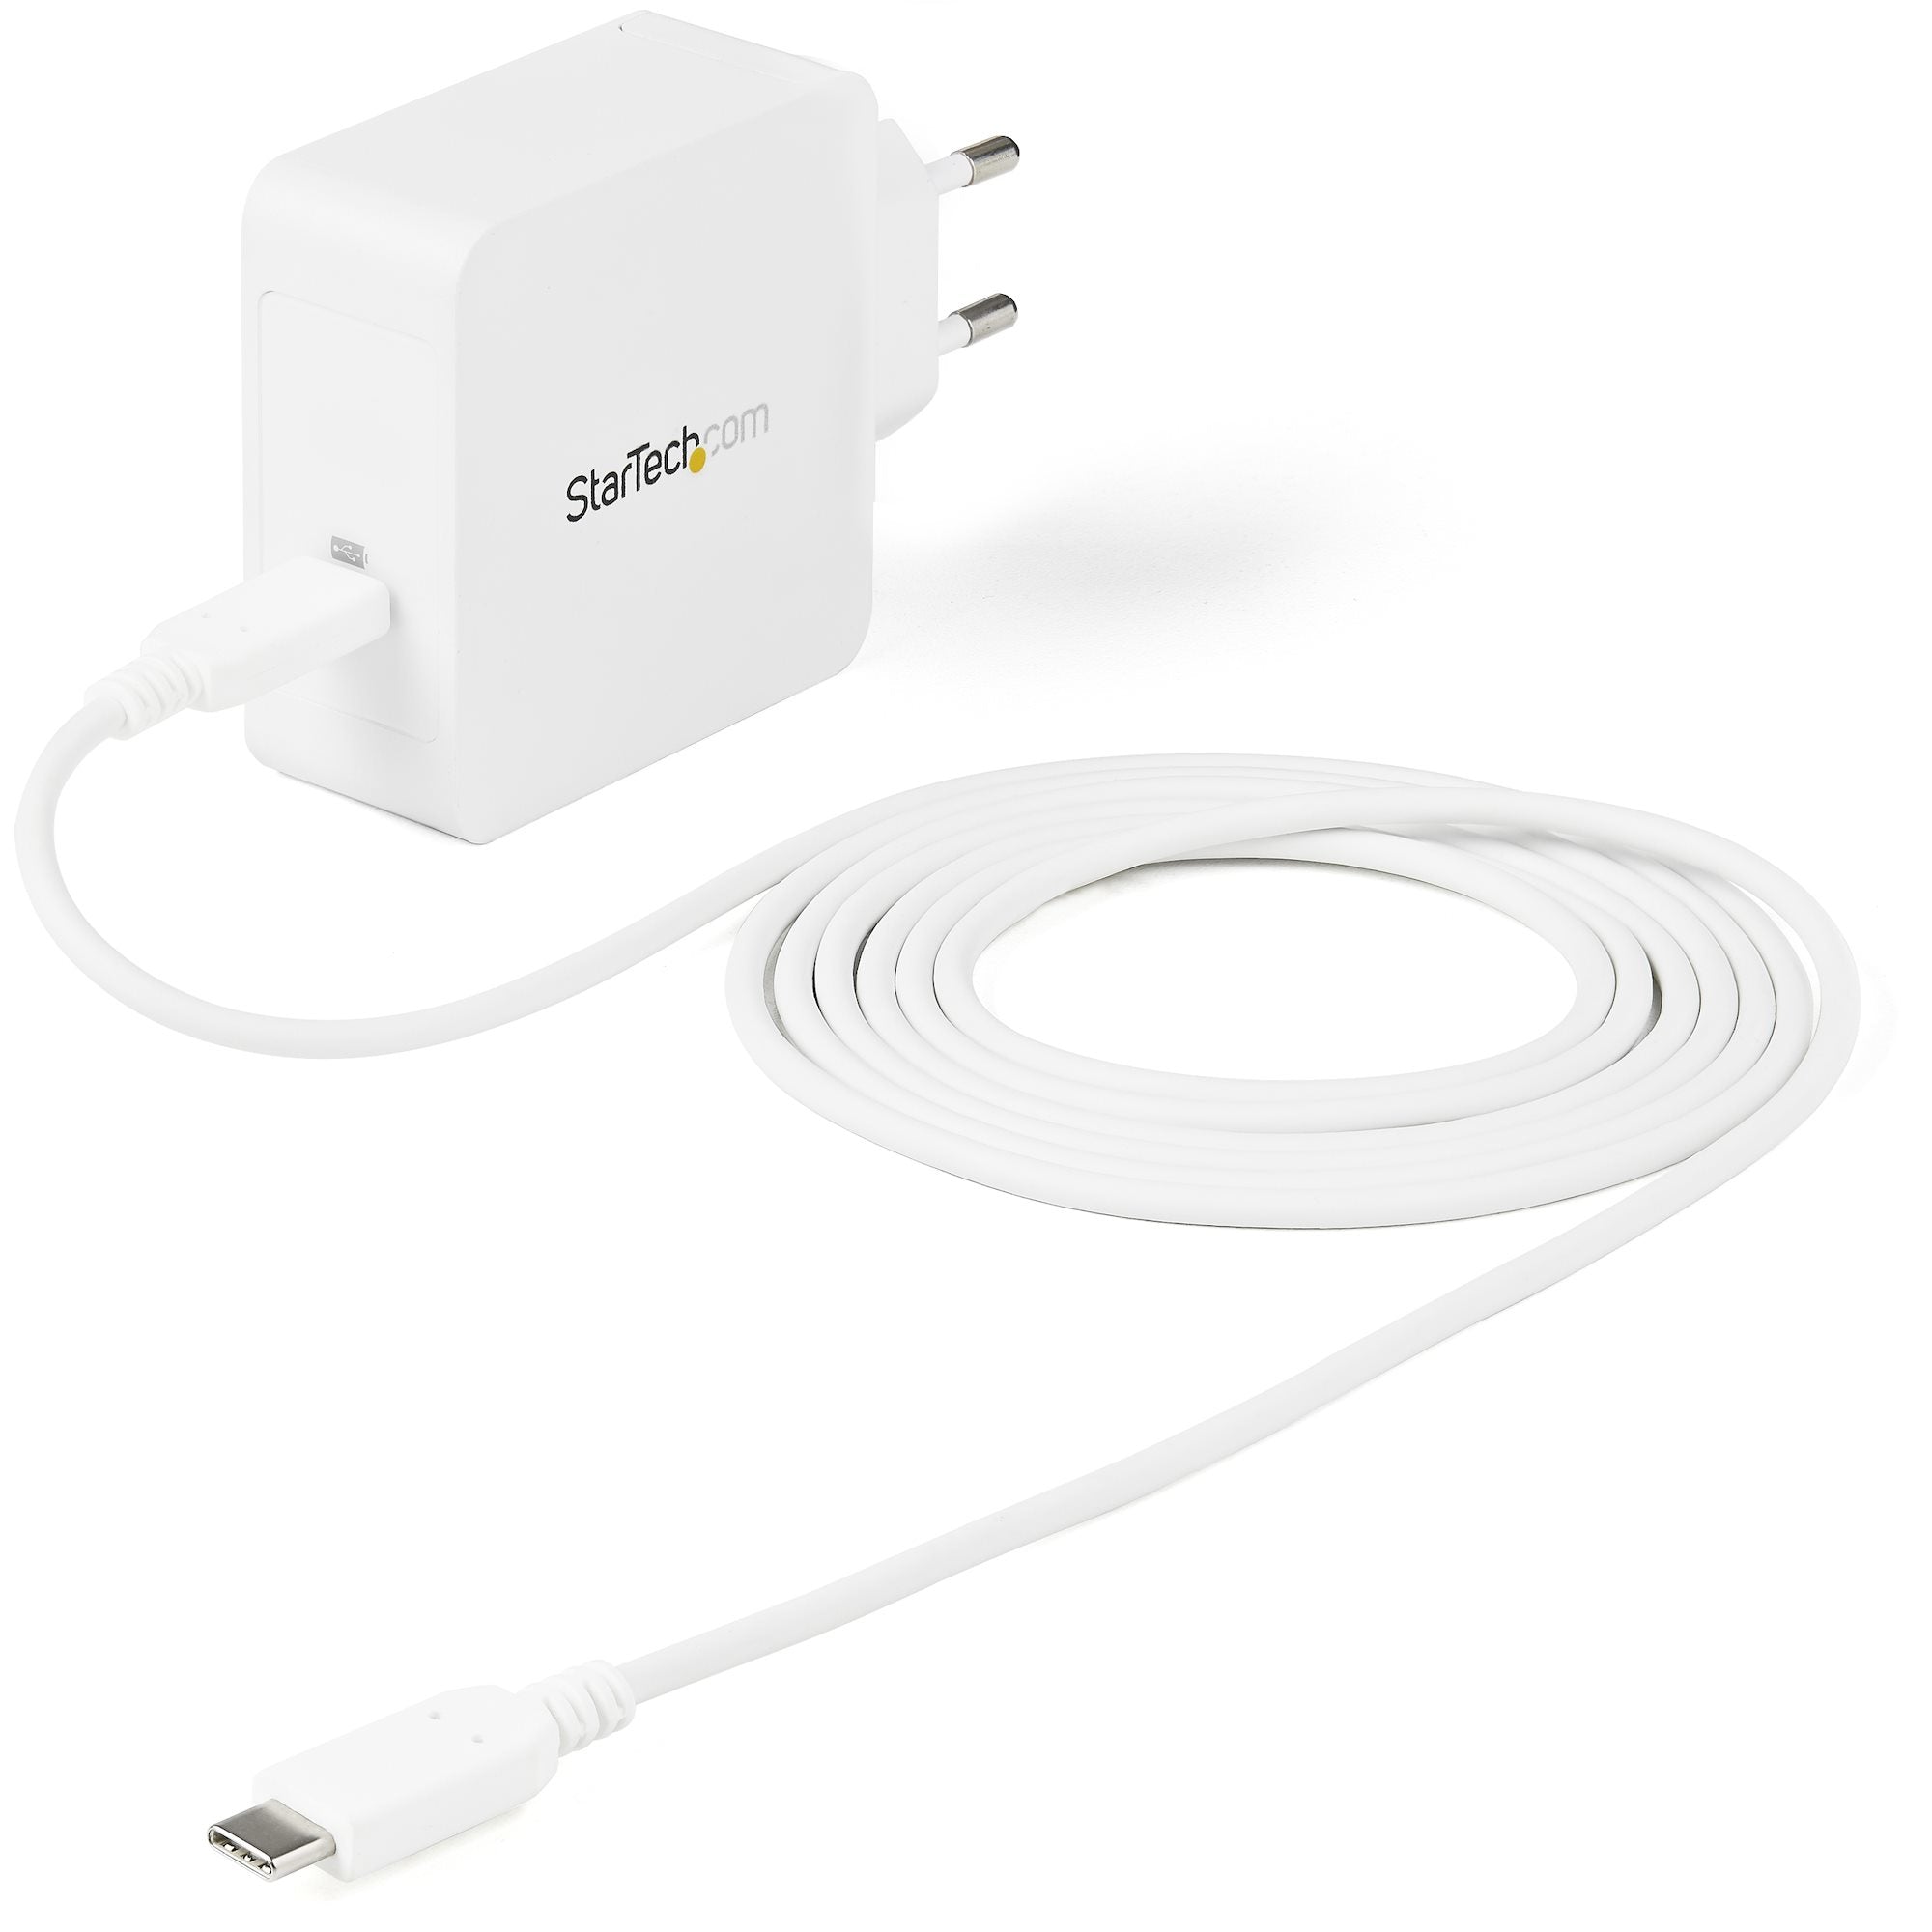 StarTech.com USB C Wall Charger - USB C Laptop Charger 60W PD - 6ft/2m Cable - Universal Compact Type C Power Adapter - Dell XPS/Lenovo X1 Carbon/HP EliteBook/MacBook - USB IF/CE Certified